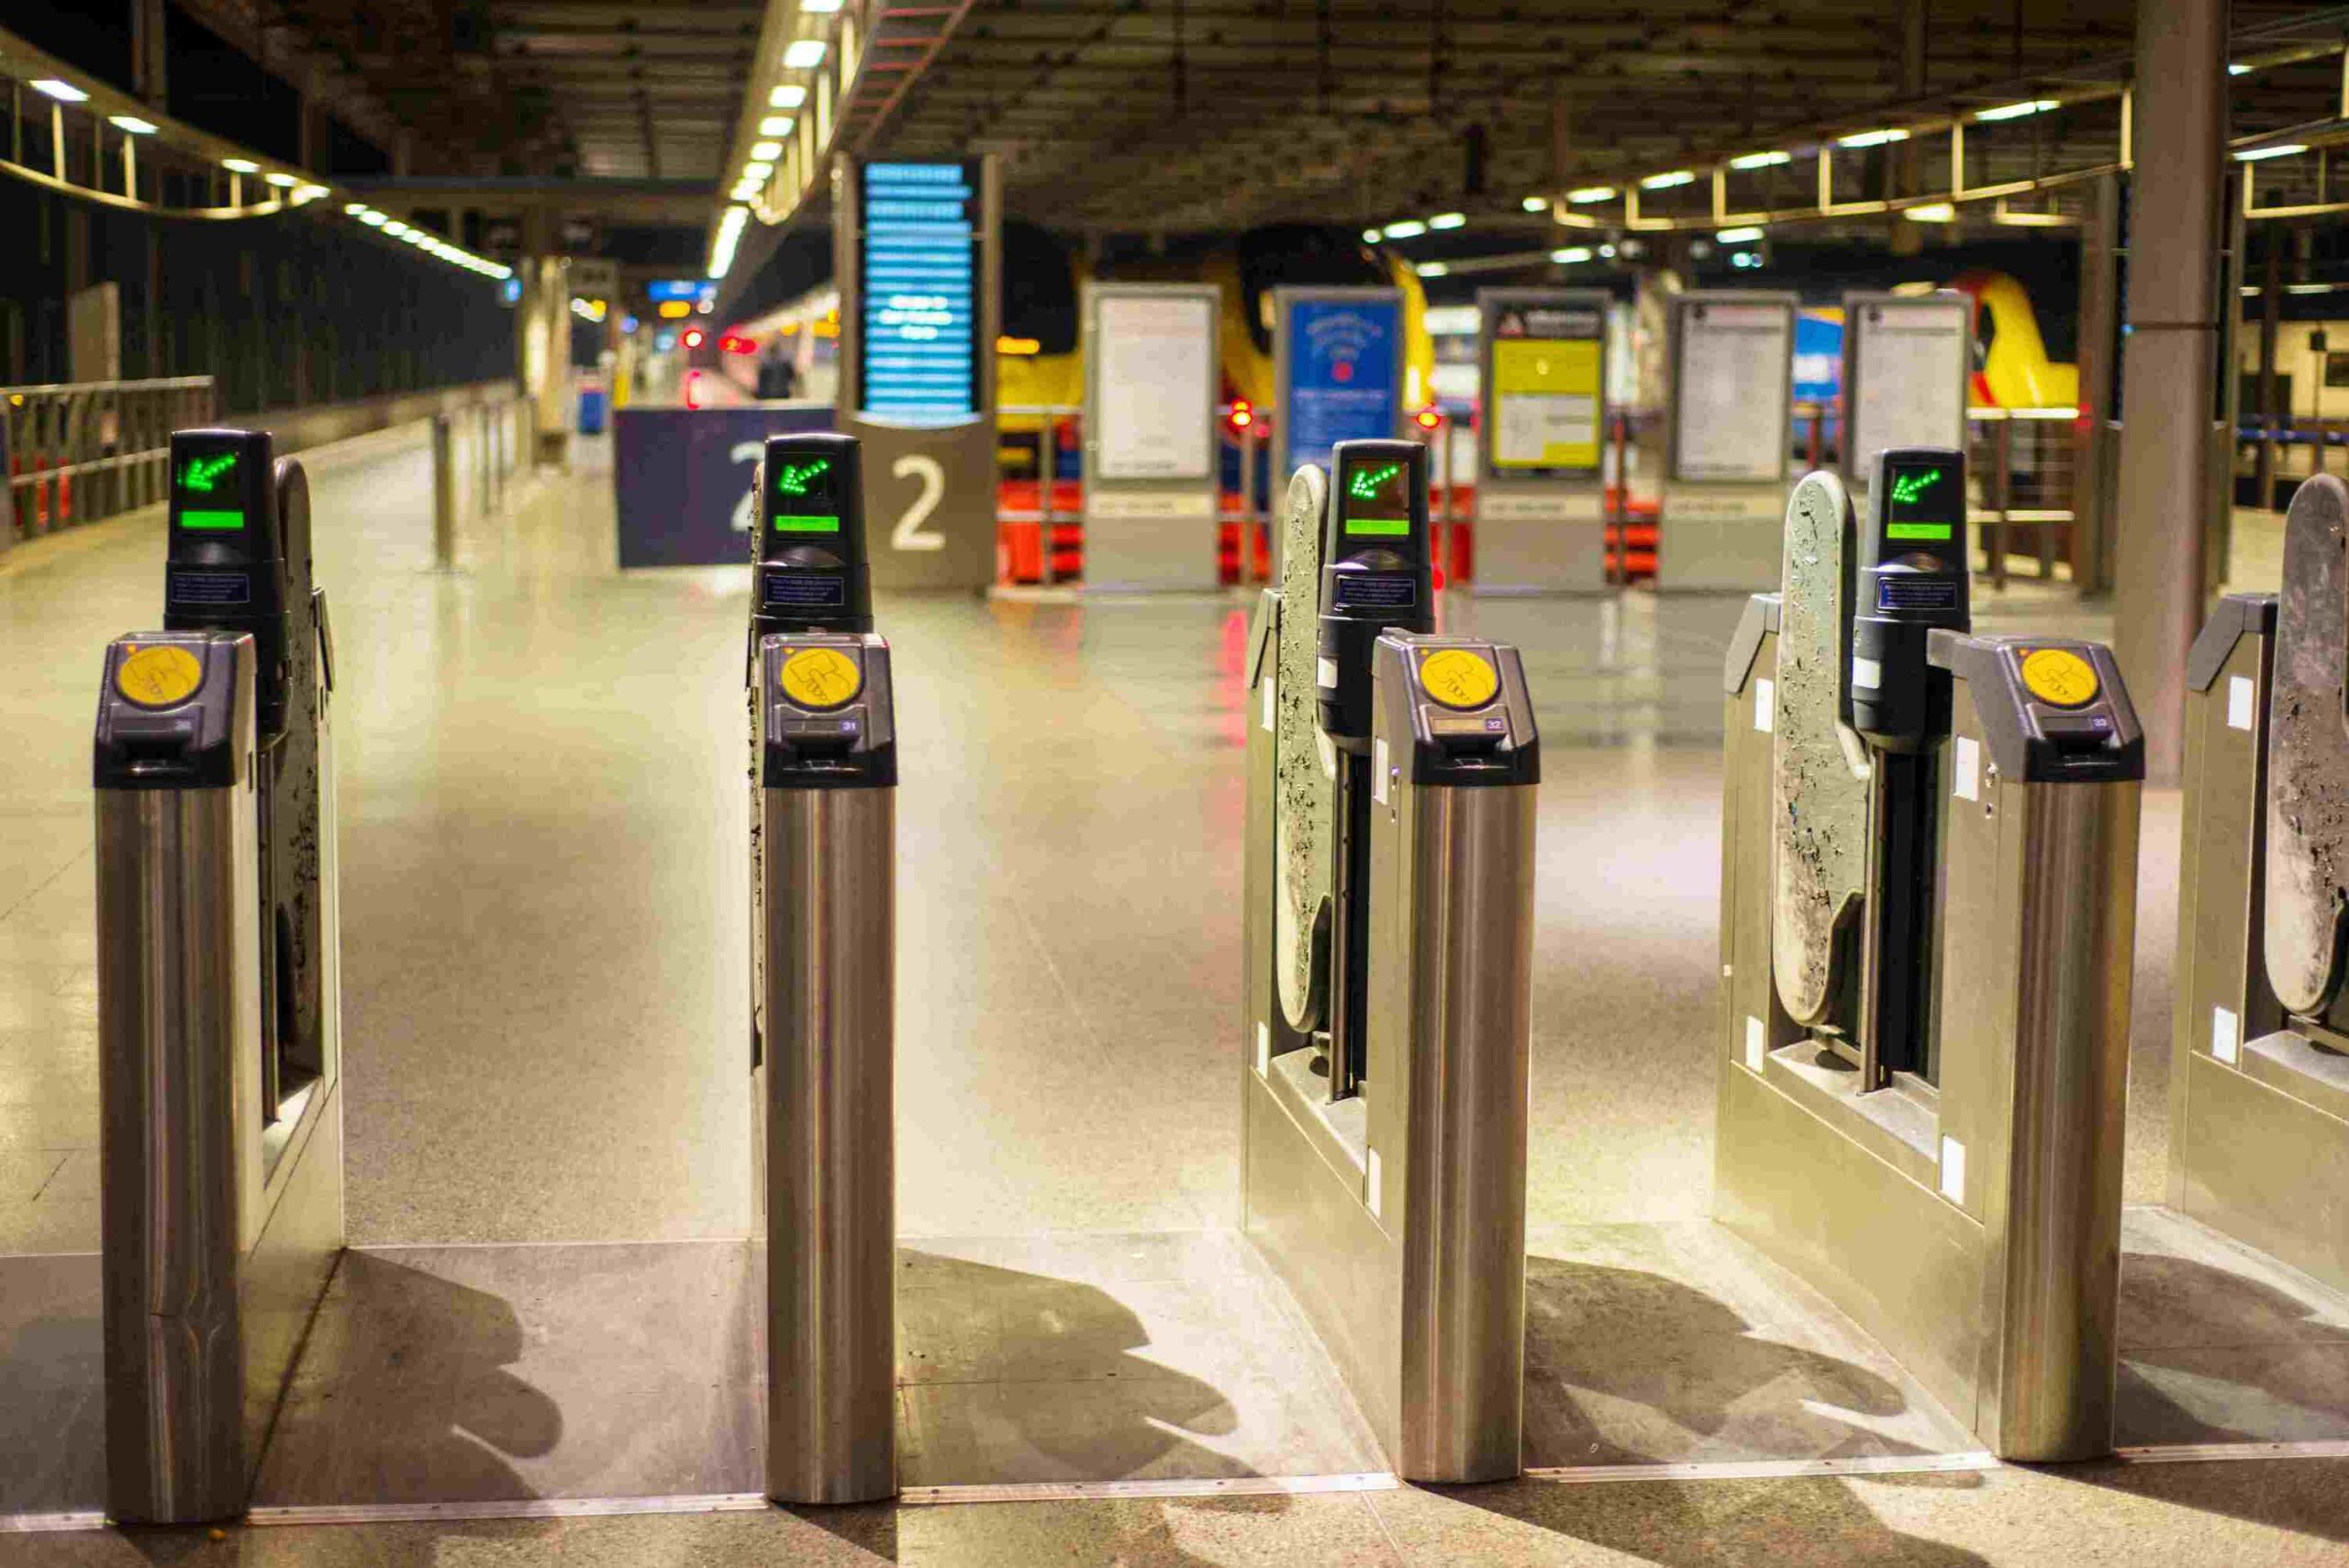 tfl-is-scrapping-peak-fares-on-fridays-for-london’s-tubes-and-trains-–-here’s-everything-you-need-to-know